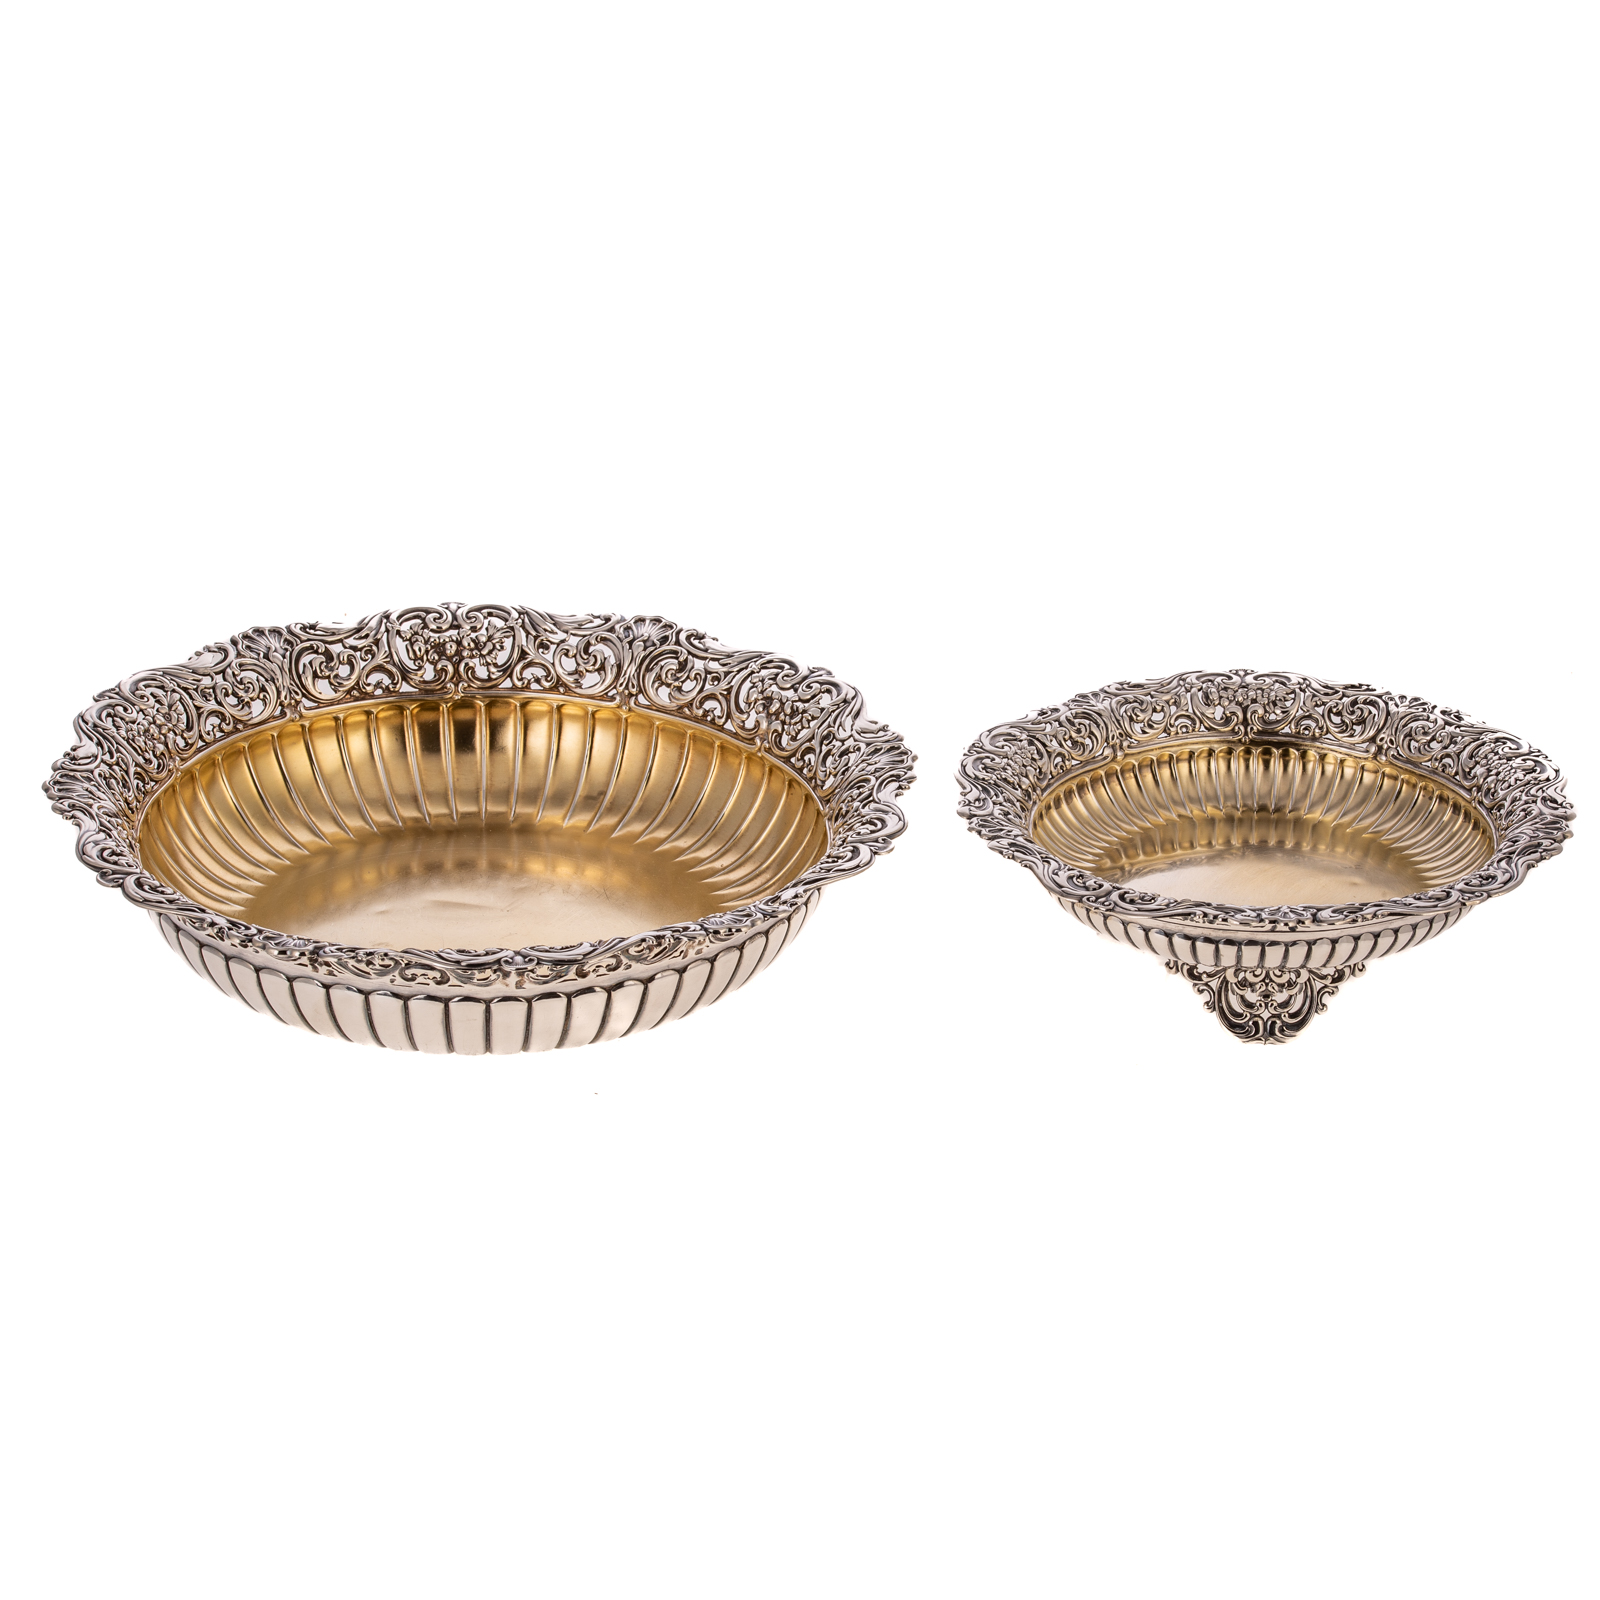 TWO WHITING GILT-STERLING BOWLS